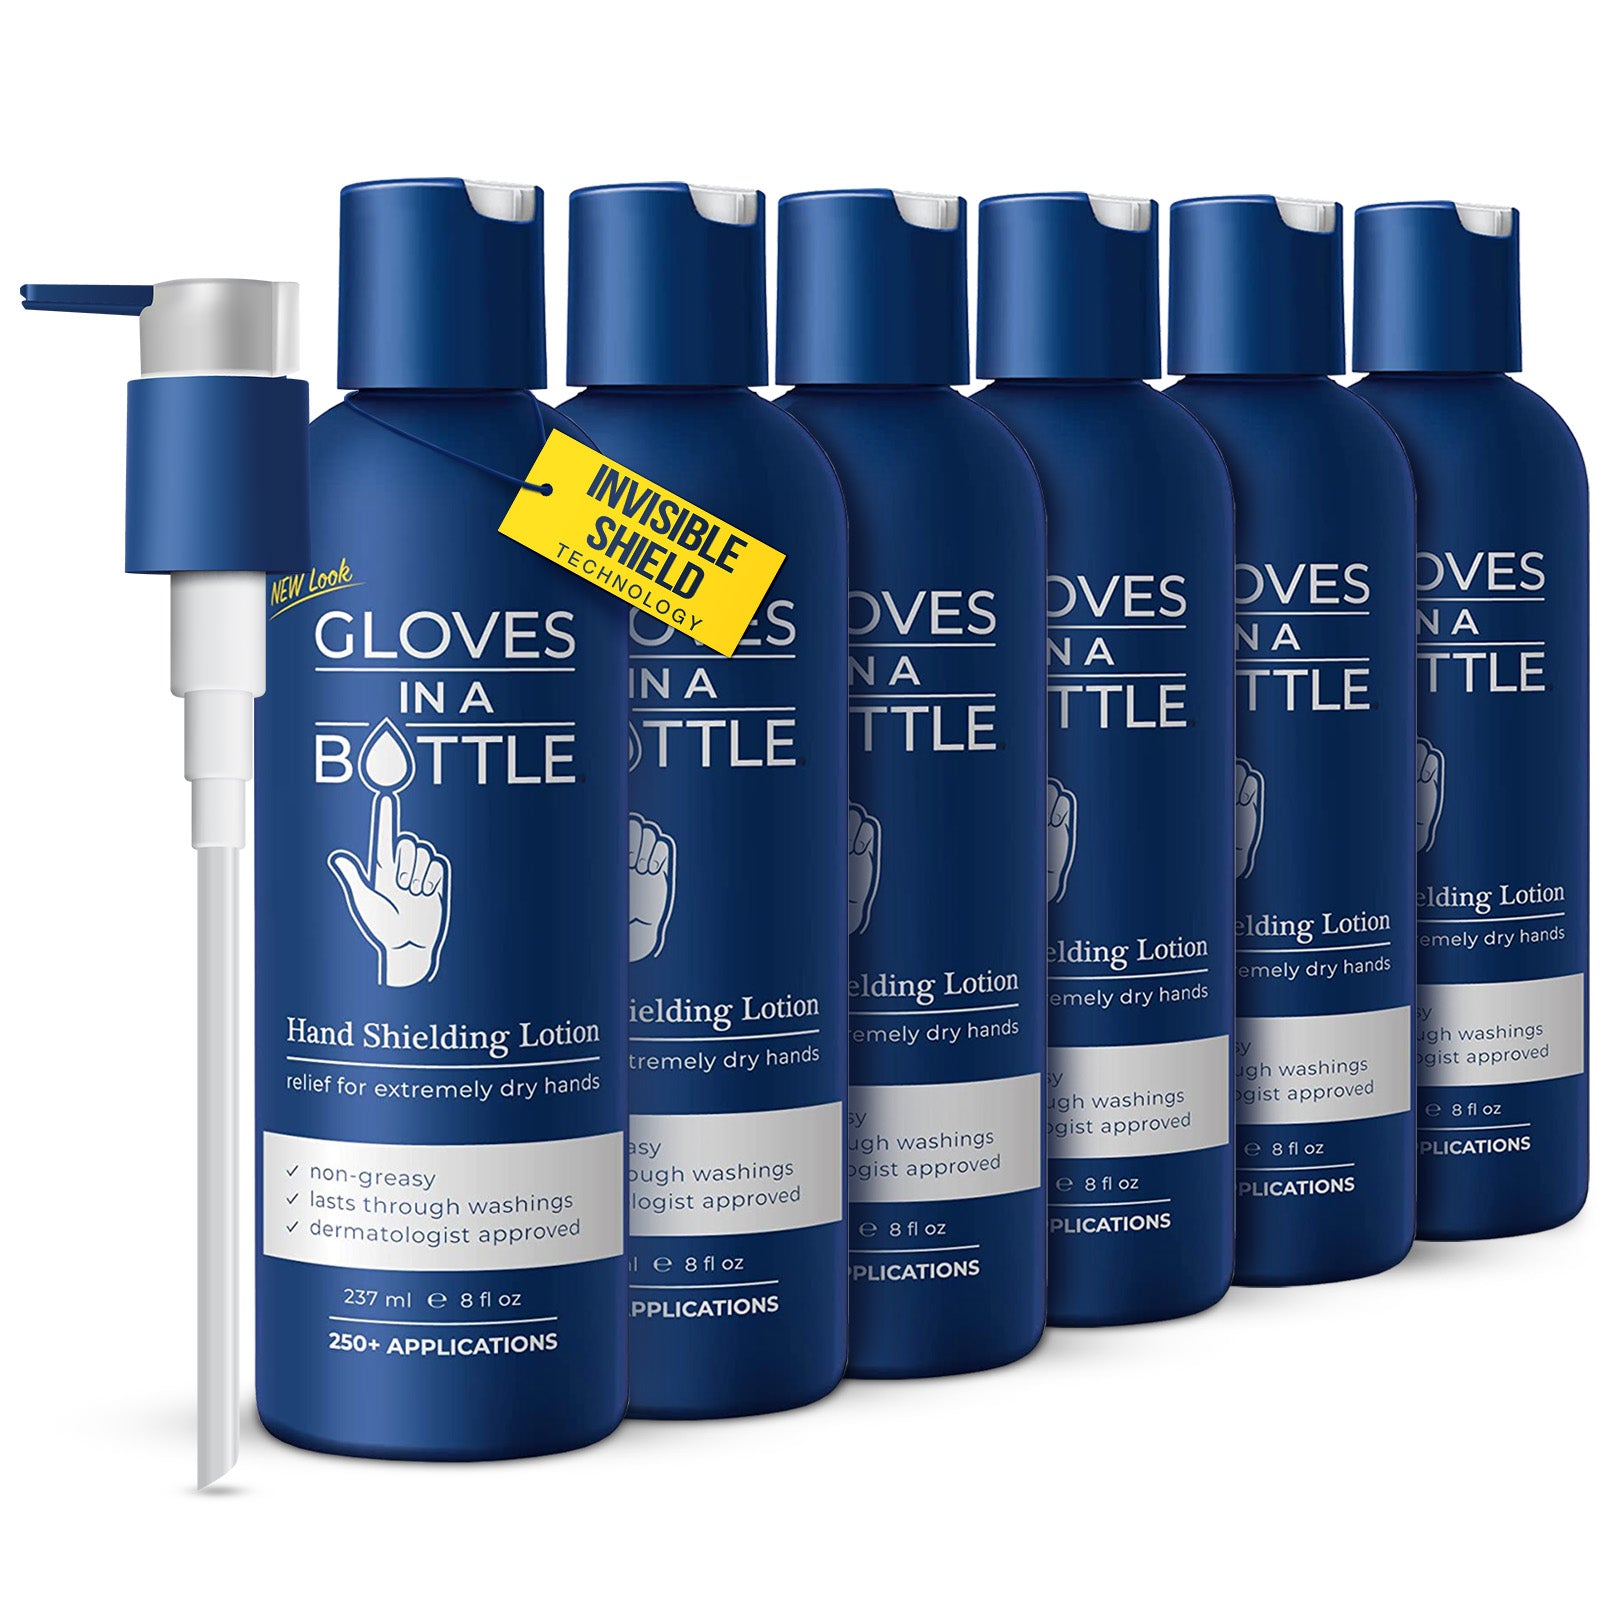 Gloves In A Bottle Shielding Lotion Packs, Featuring a New Pump